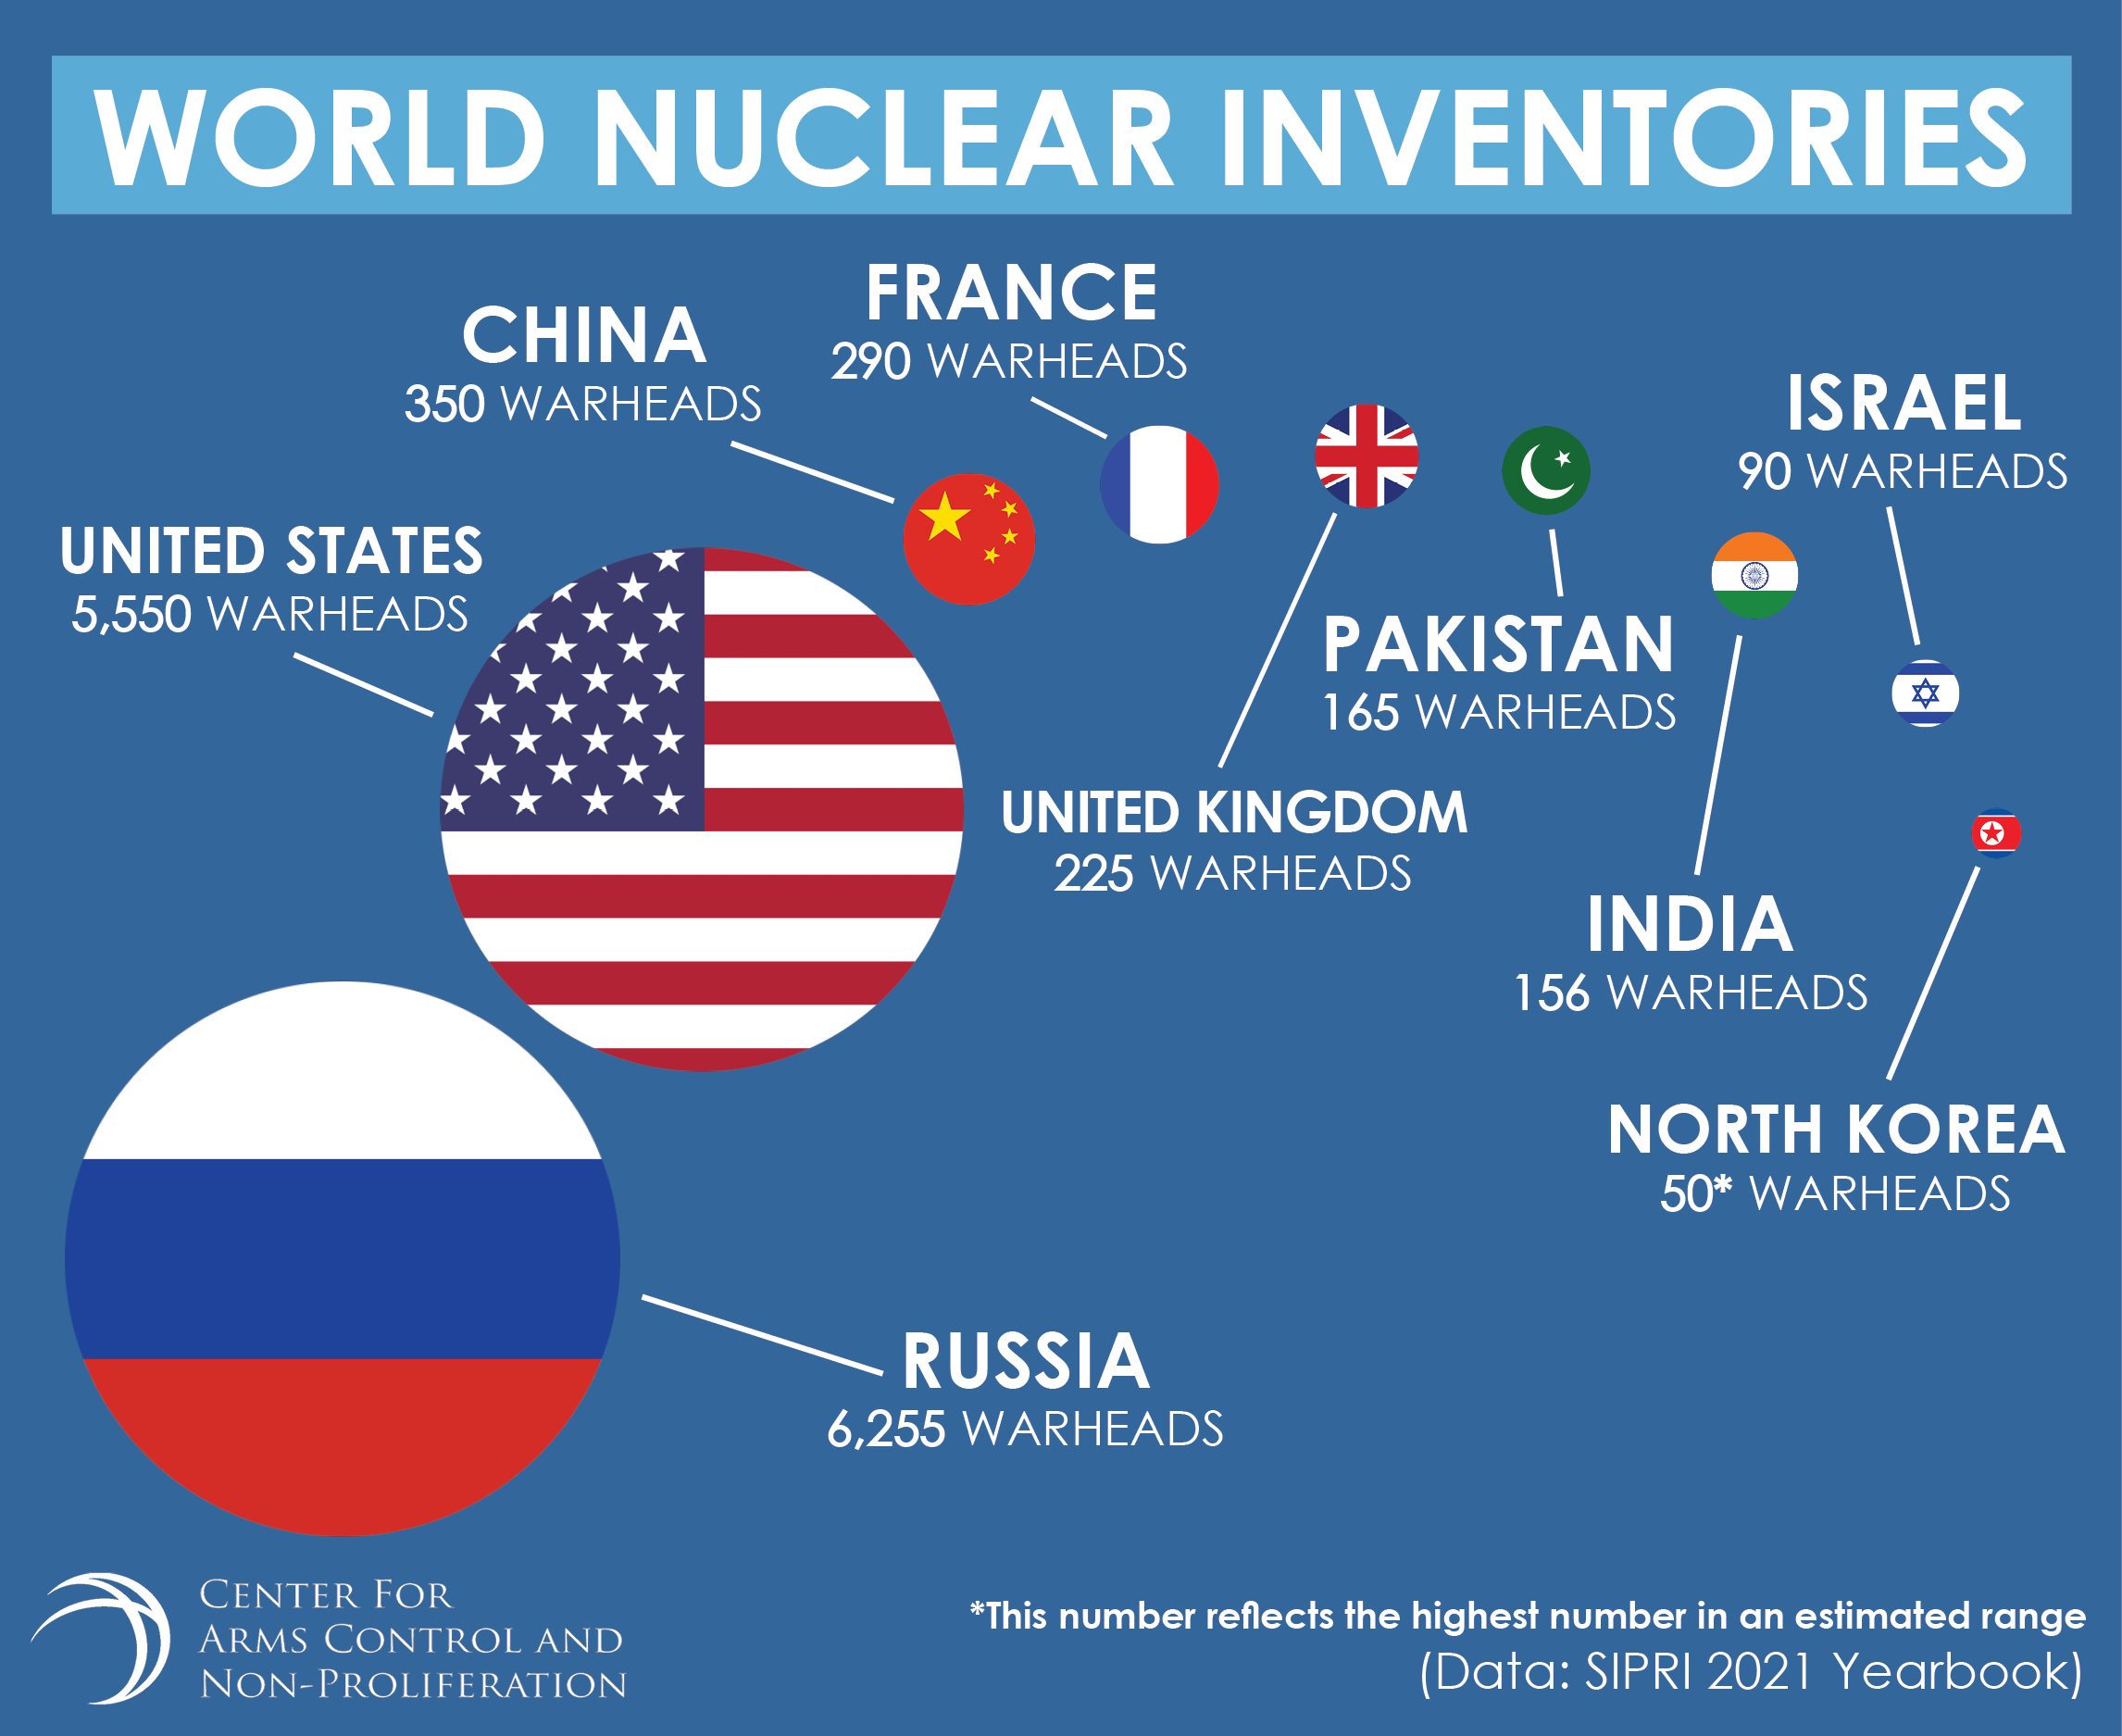 World Nuclear Inventories - Center for Arms Control and Non-Proliferation